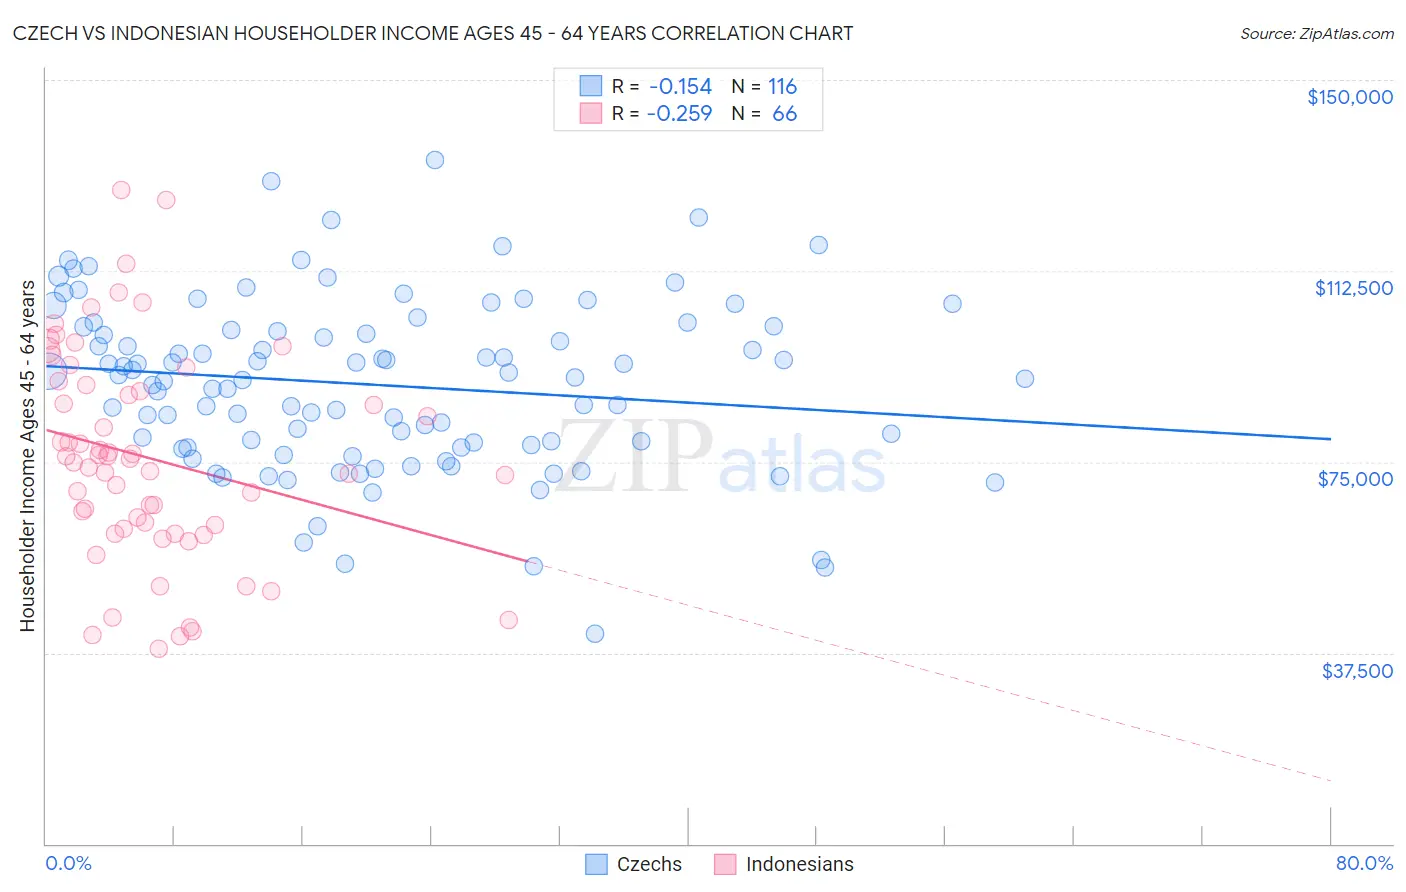 Czech vs Indonesian Householder Income Ages 45 - 64 years